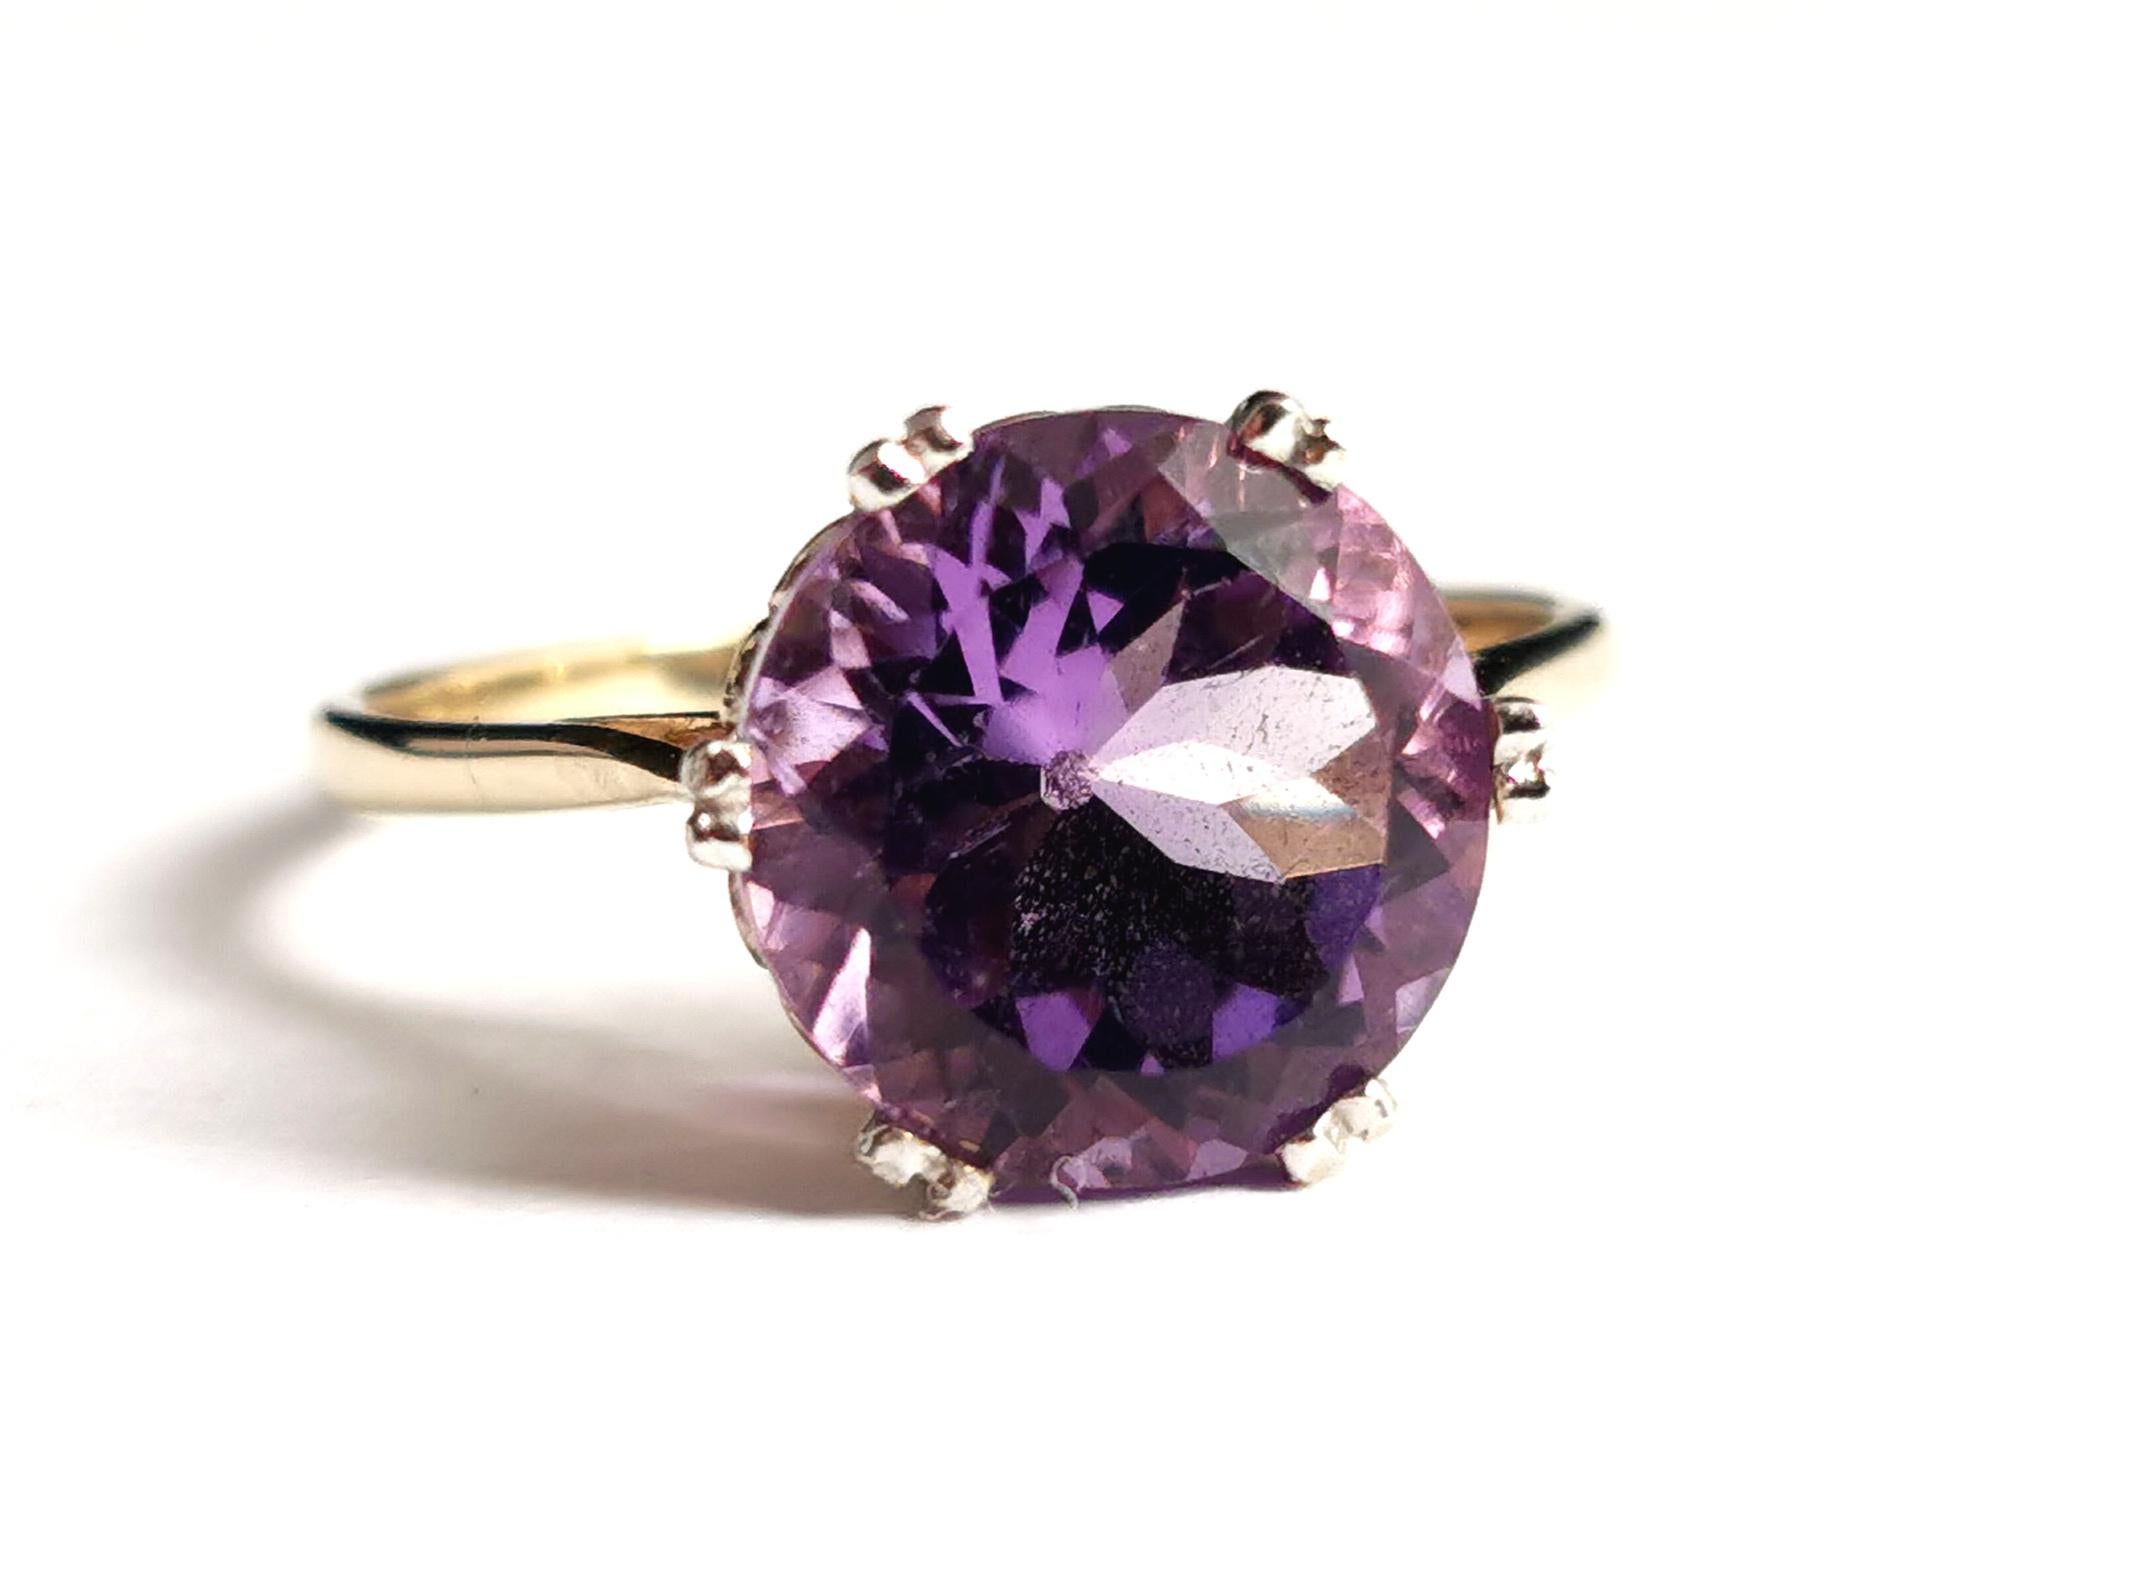 Vintage Amethyst Cocktail Ring, 9k Yellow Gold 8